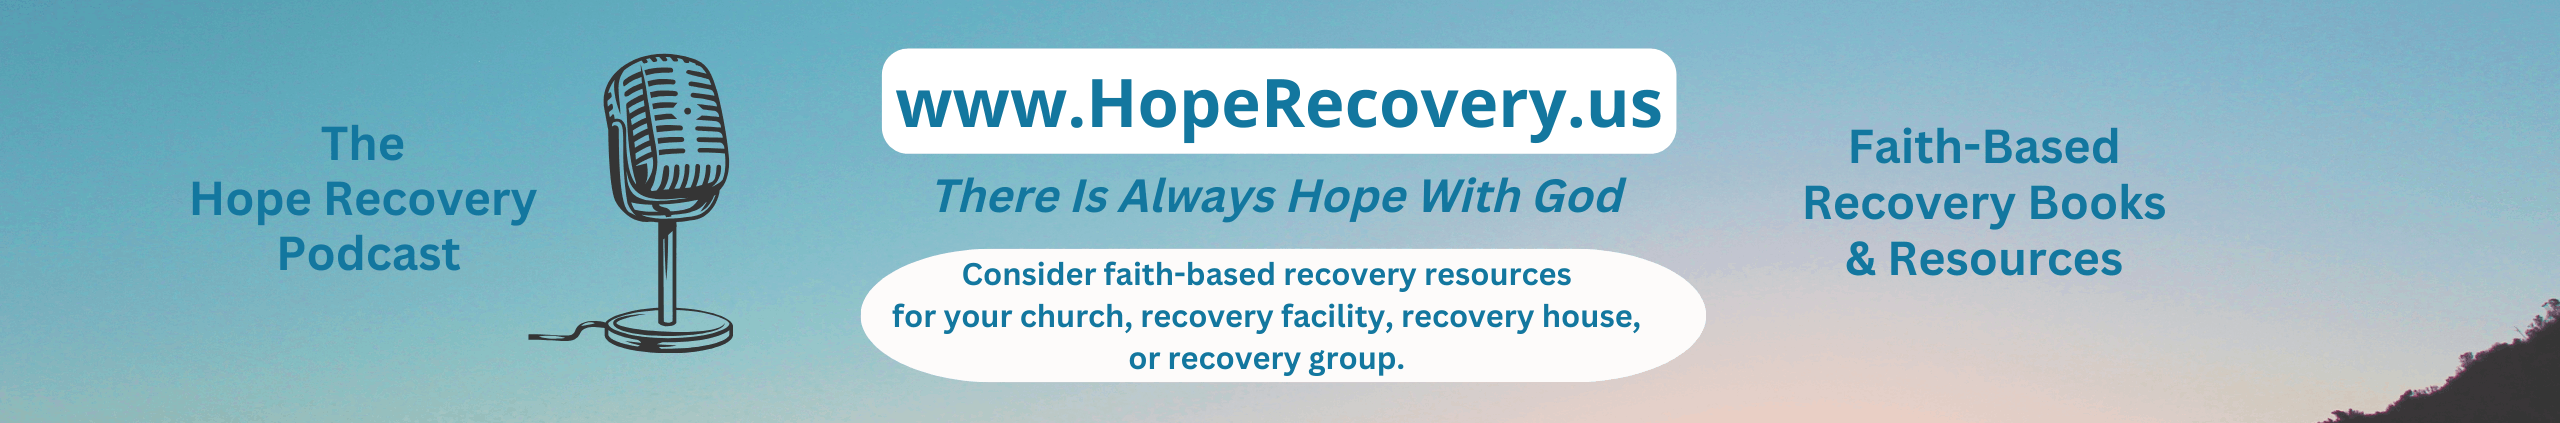 The Hope Recovery Podcast Faith-based addiction recovery